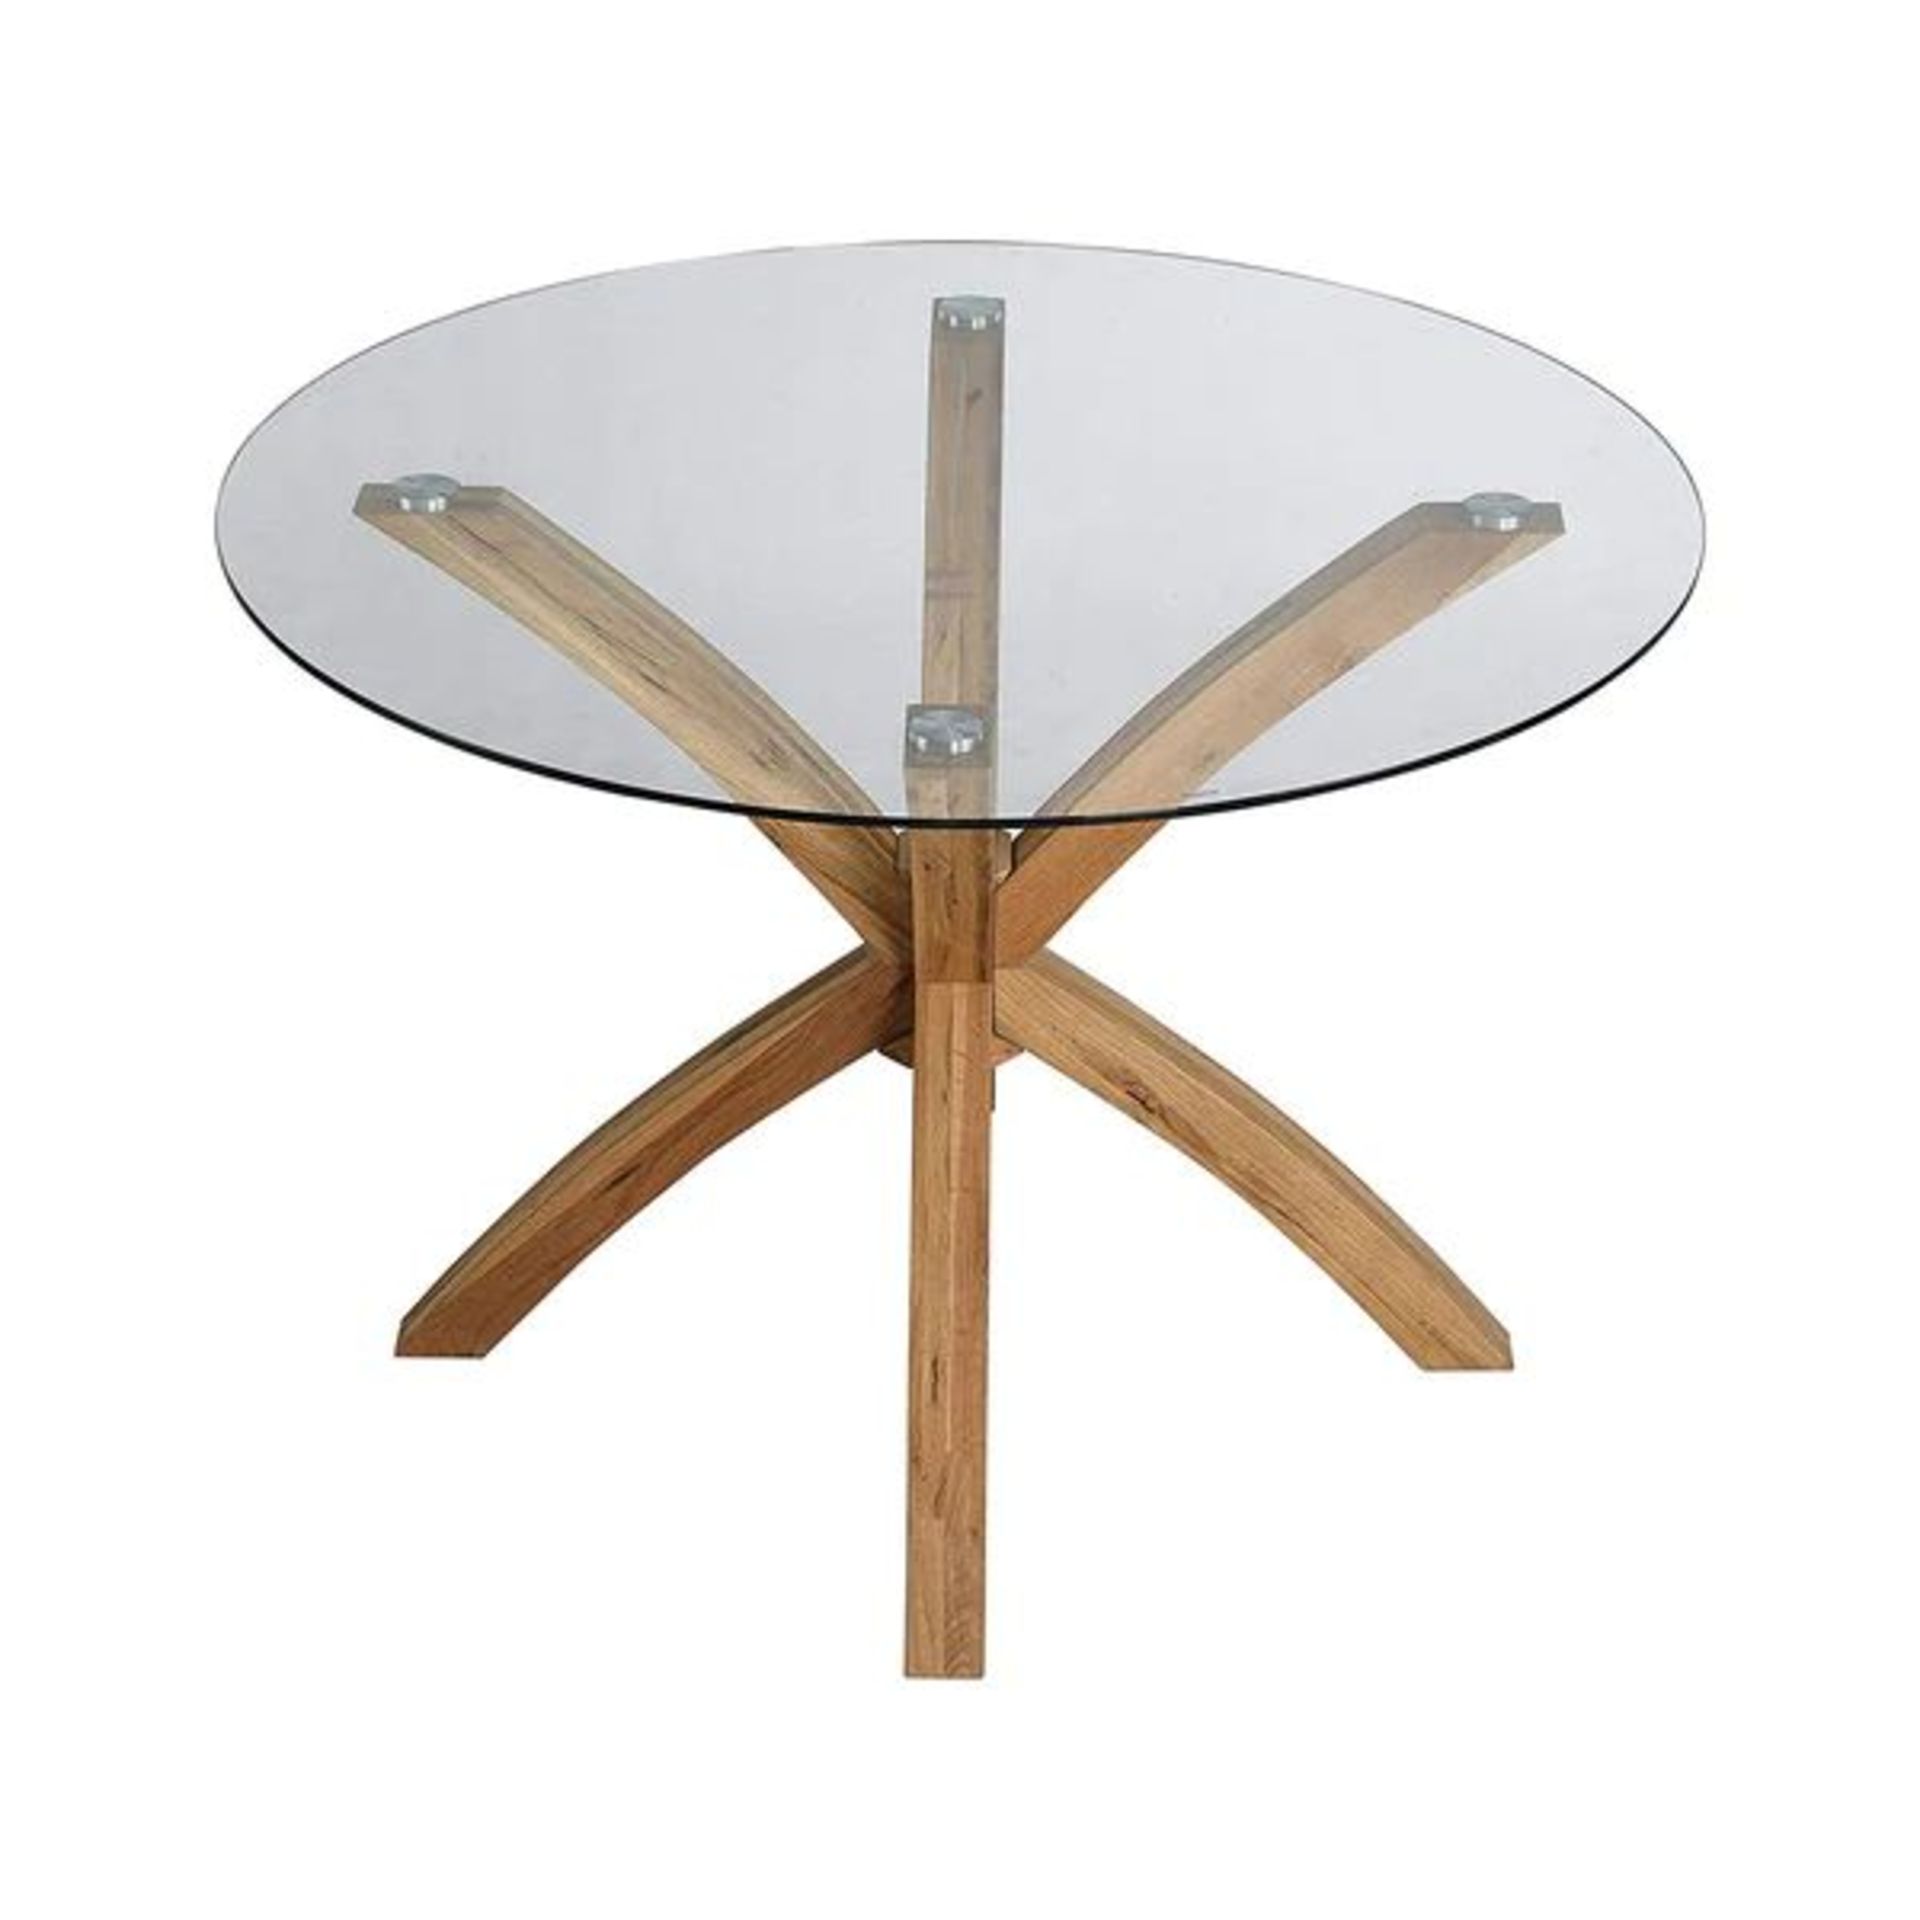 Lugano 110cm Round Glass Top Solid Oak Legs Dining Table. - BI. RRP £359.99. Featuring four subtly - Image 2 of 2